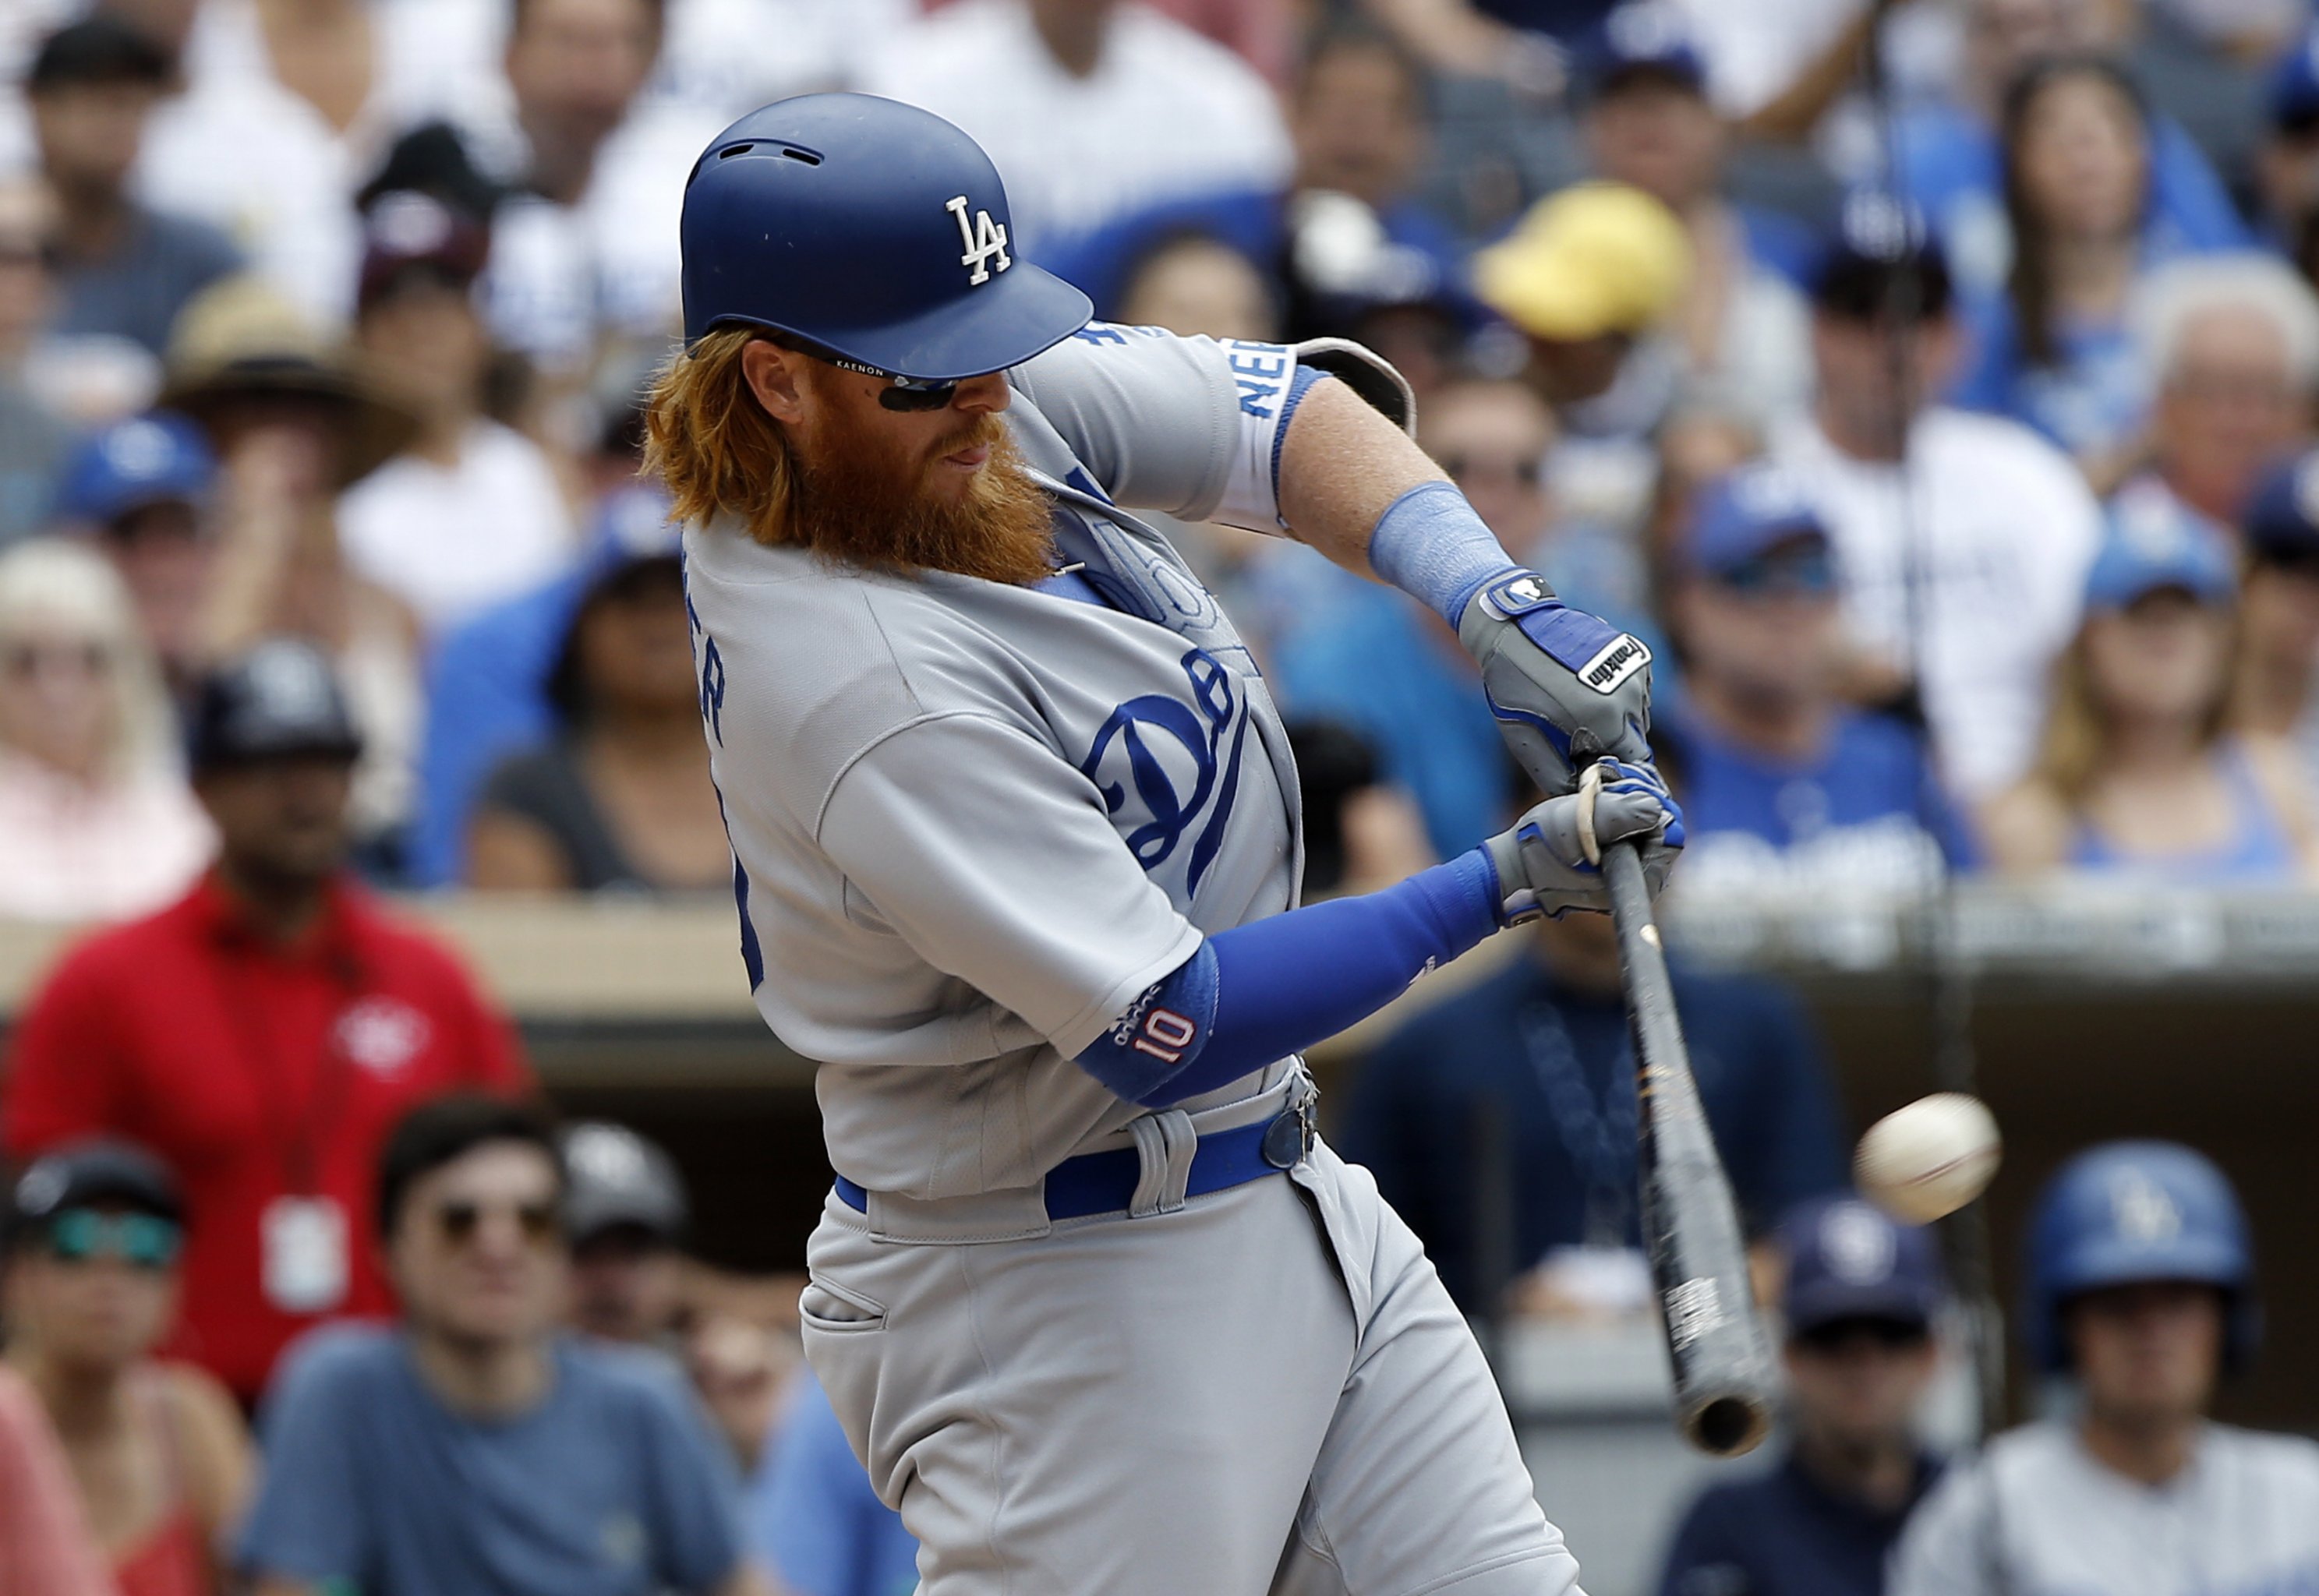 Justin Turner's two homers power Dodgers over Padres